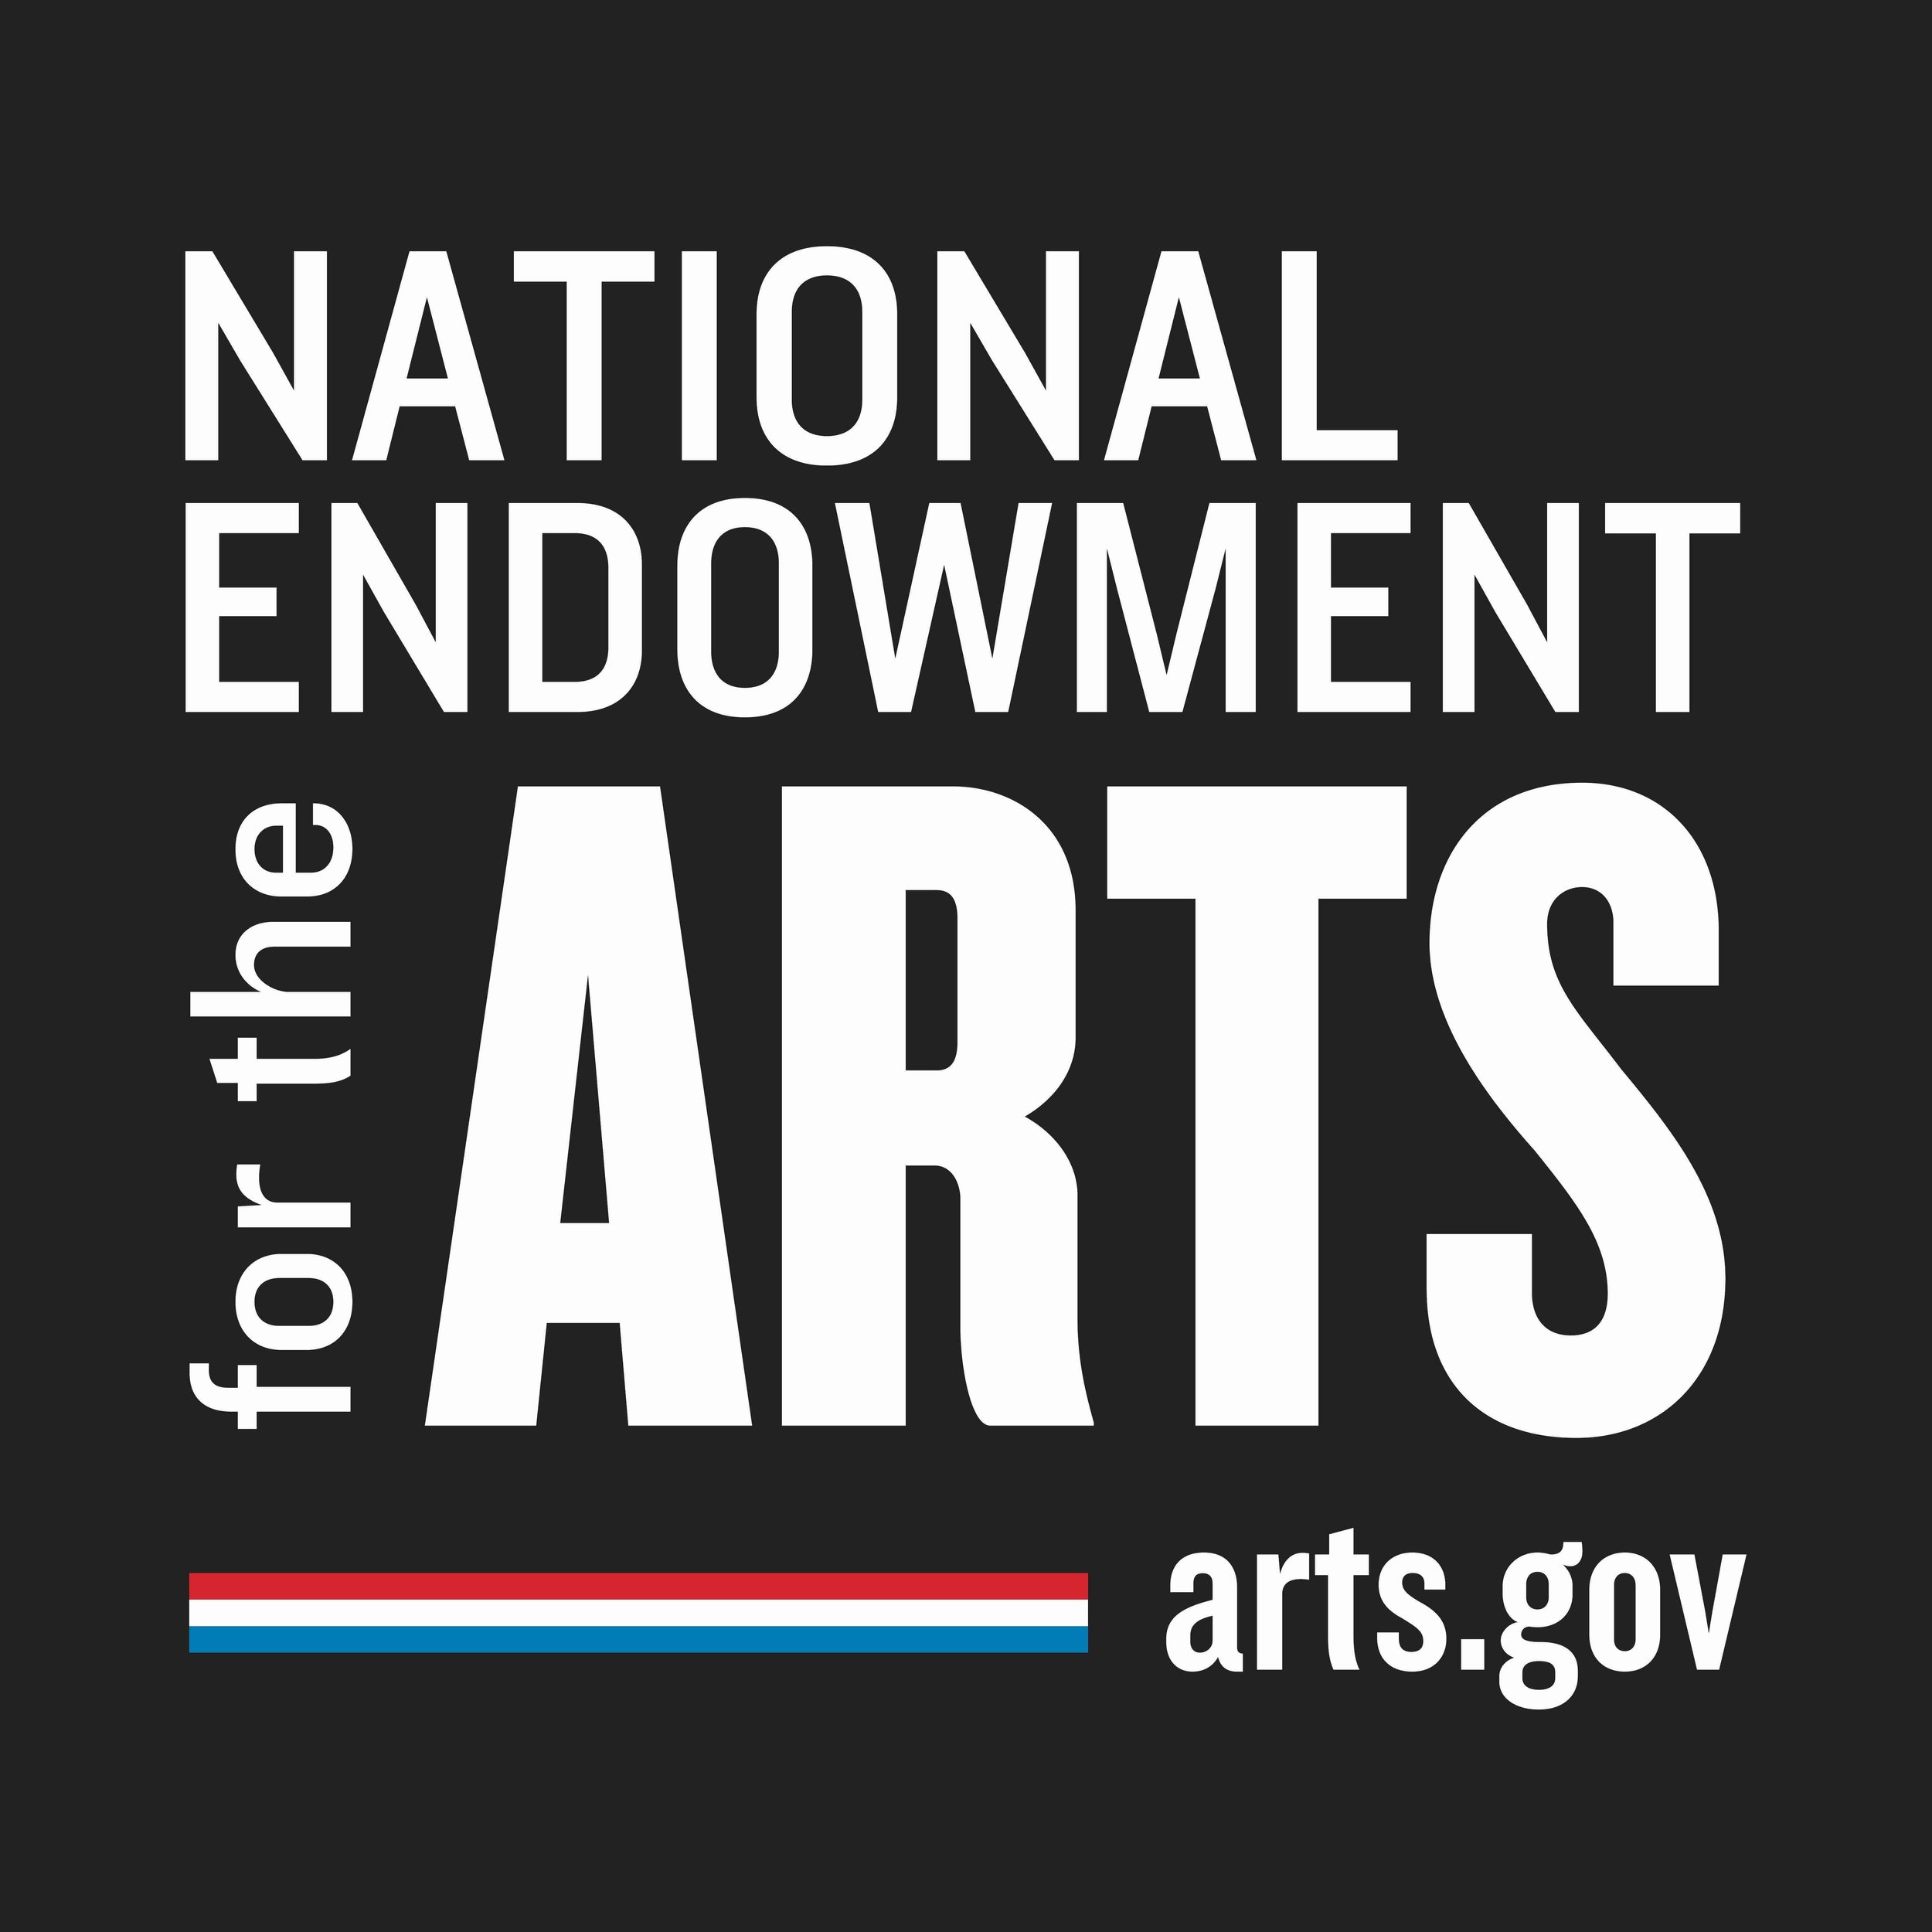 national_endowment_for_the_arts_logo small.jpg